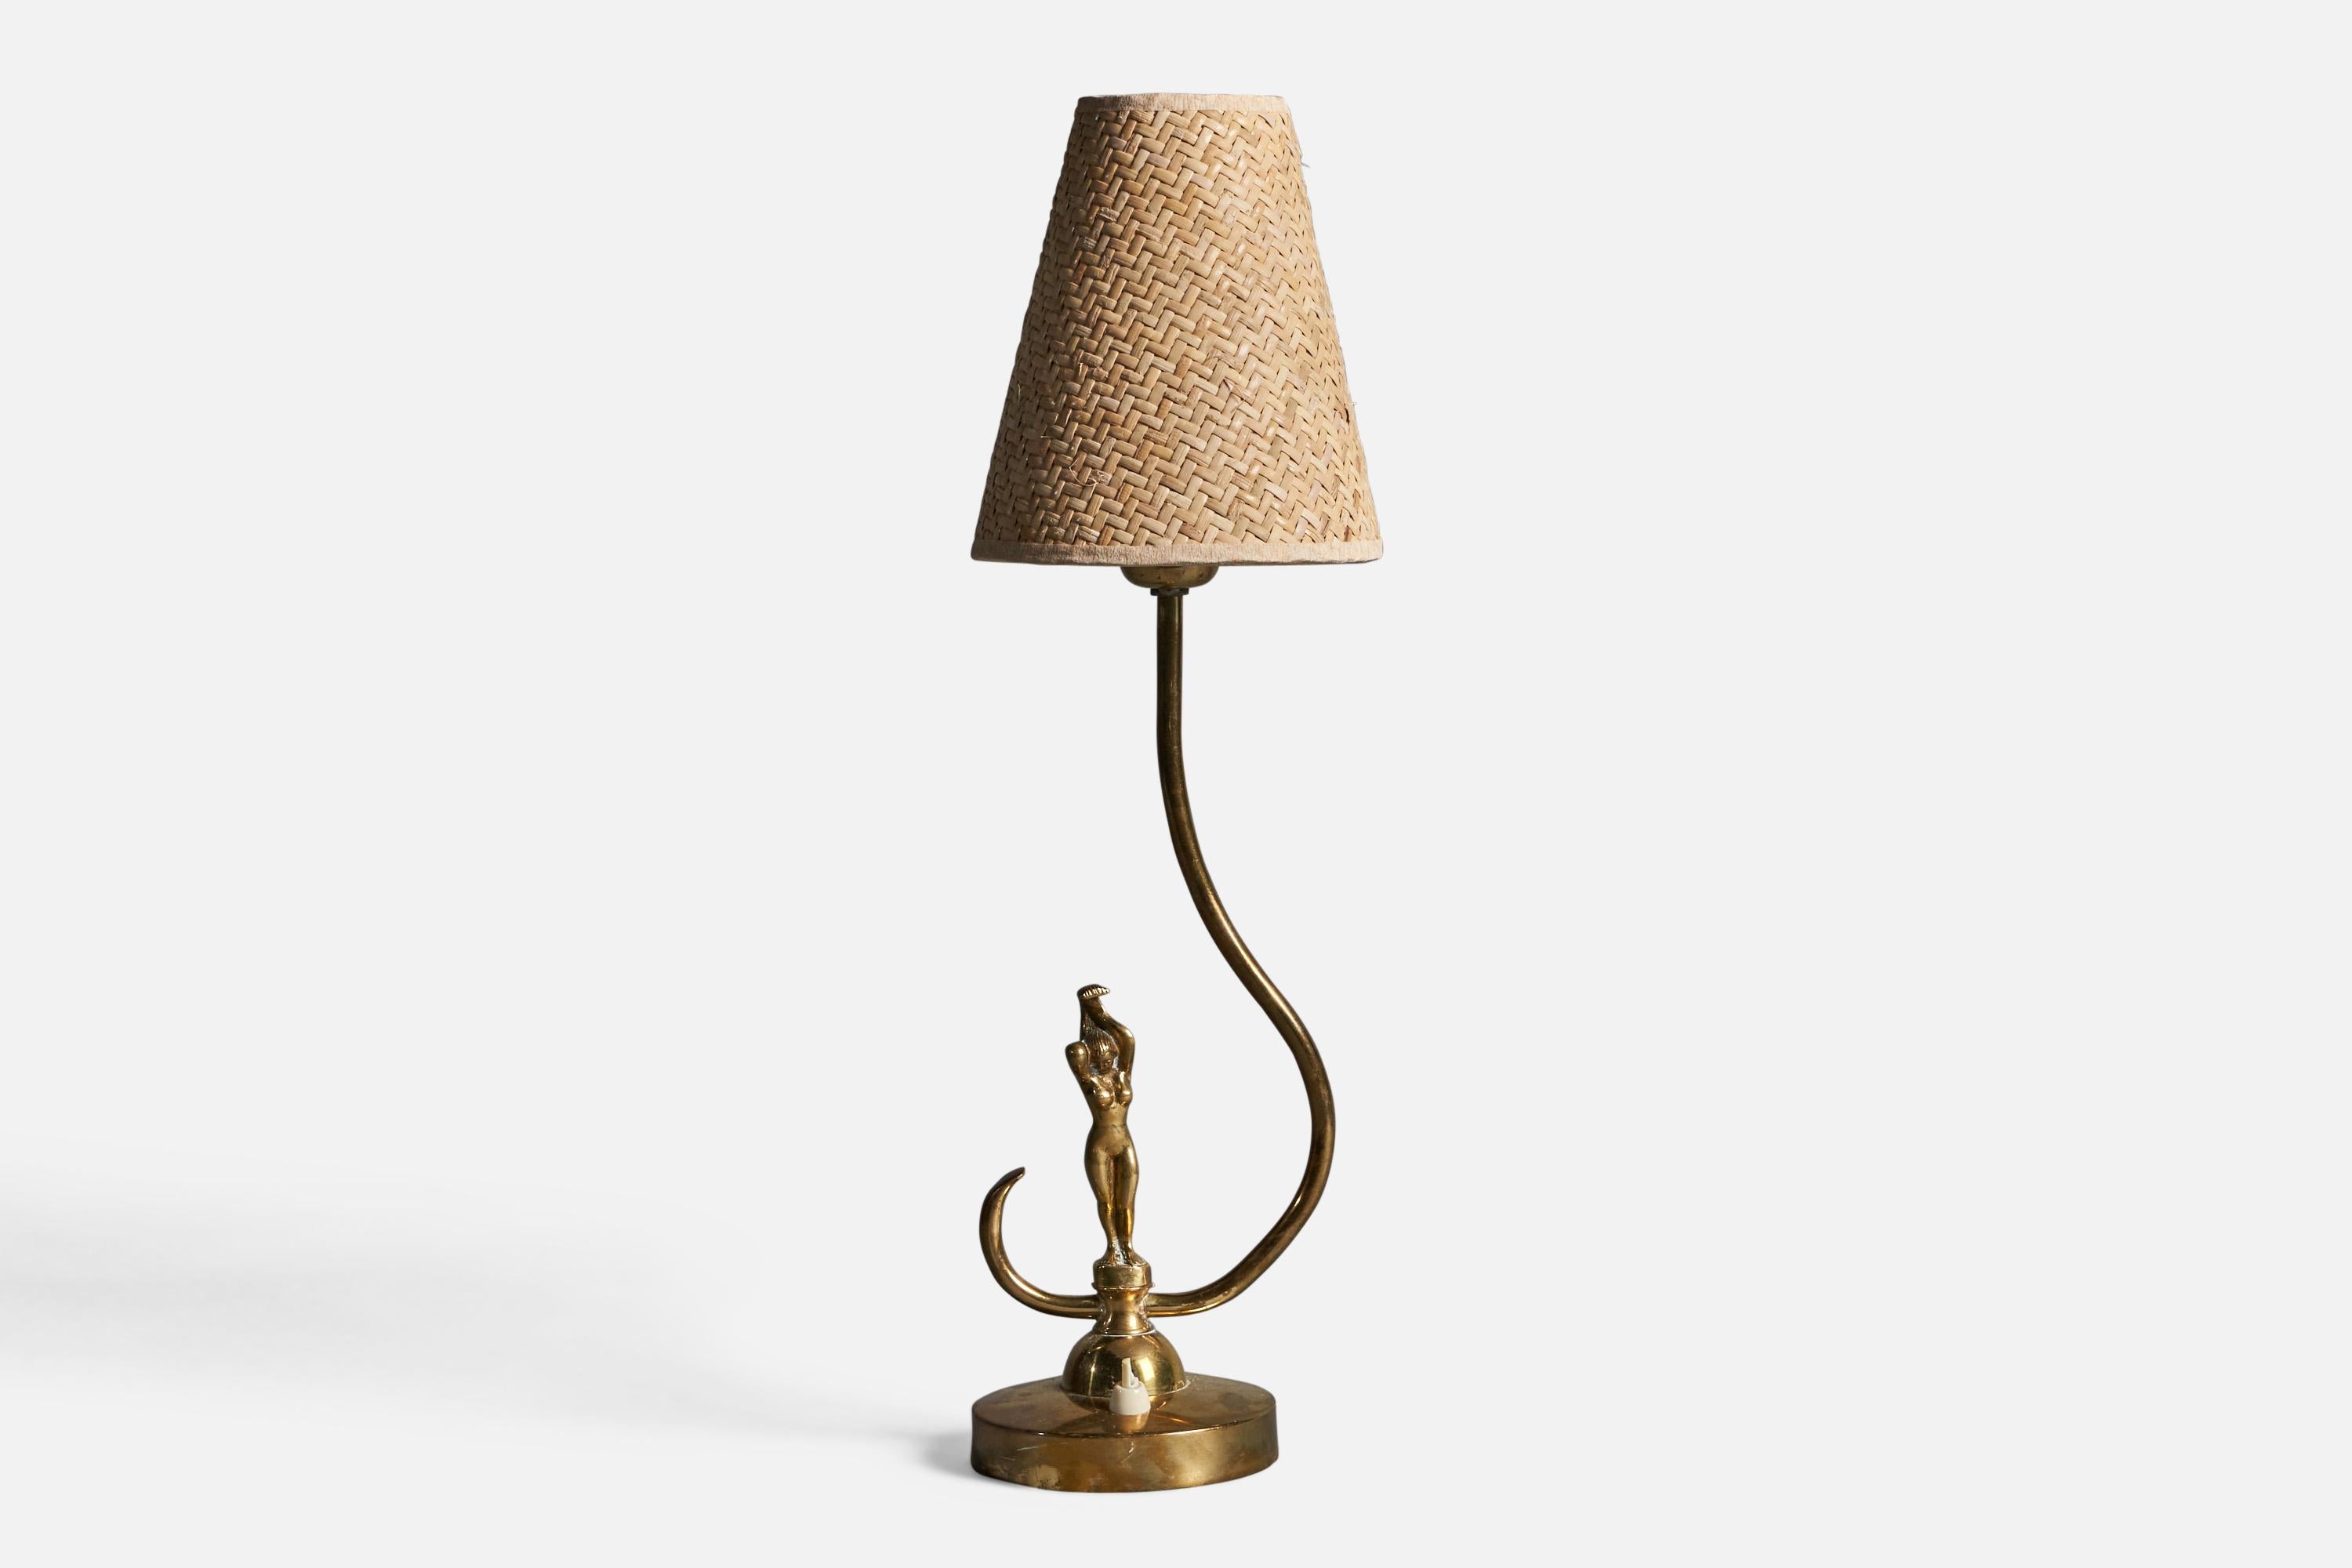 A brass and rattan table lamp, designed and produced in Sweden, 1930s.

Overall Dimensions (inches): 19.75